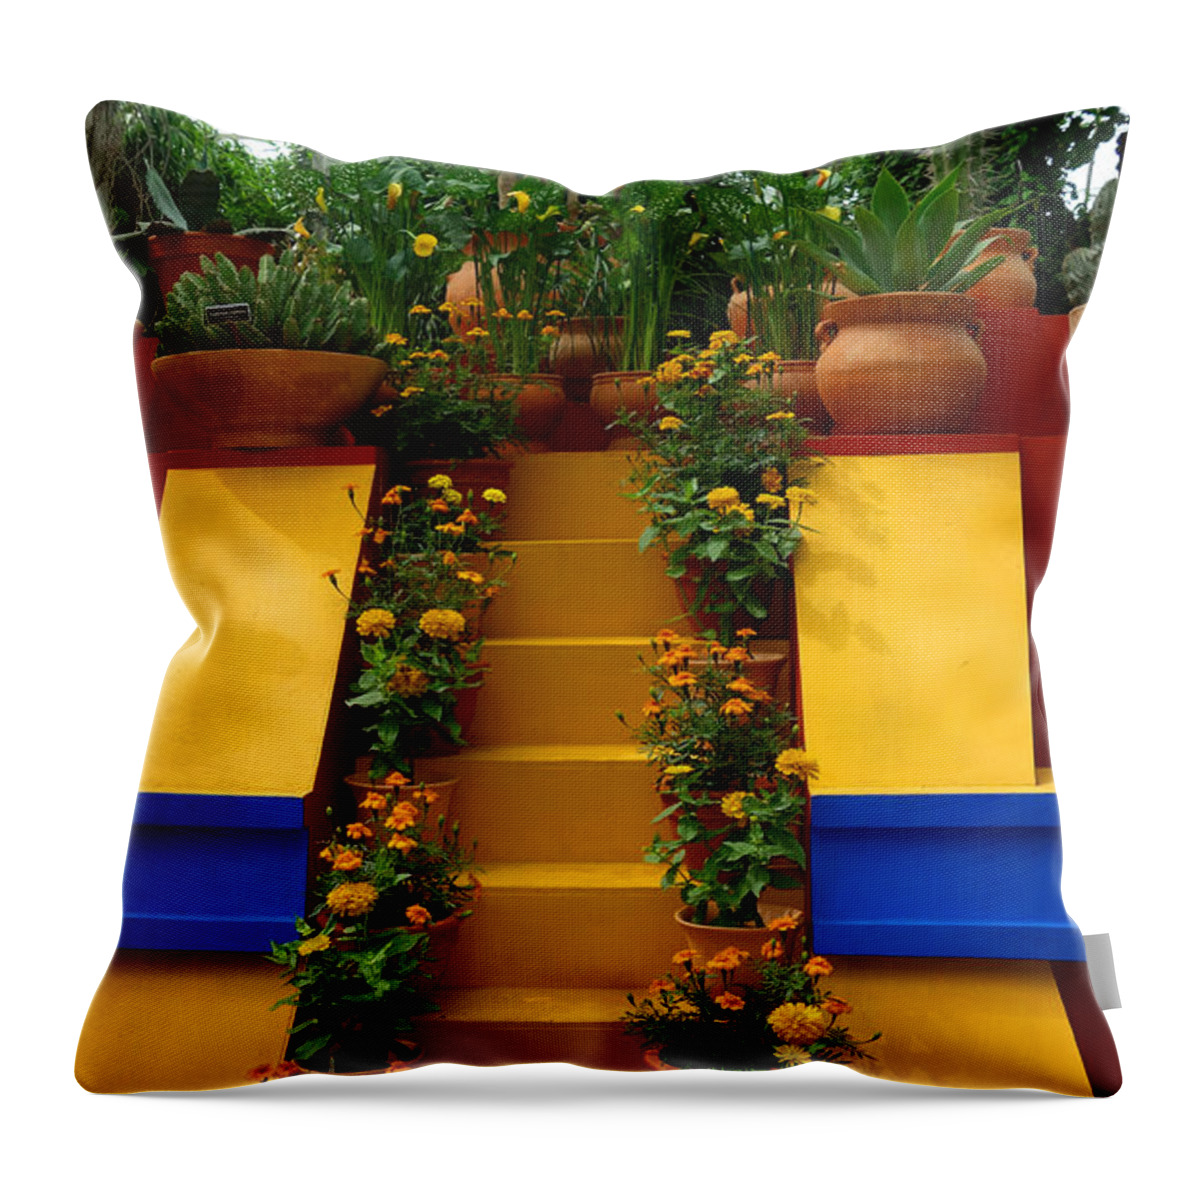 Steps Throw Pillow featuring the photograph Frida Kahlo Exhibit at New York Botanic Garden by Diane Lent